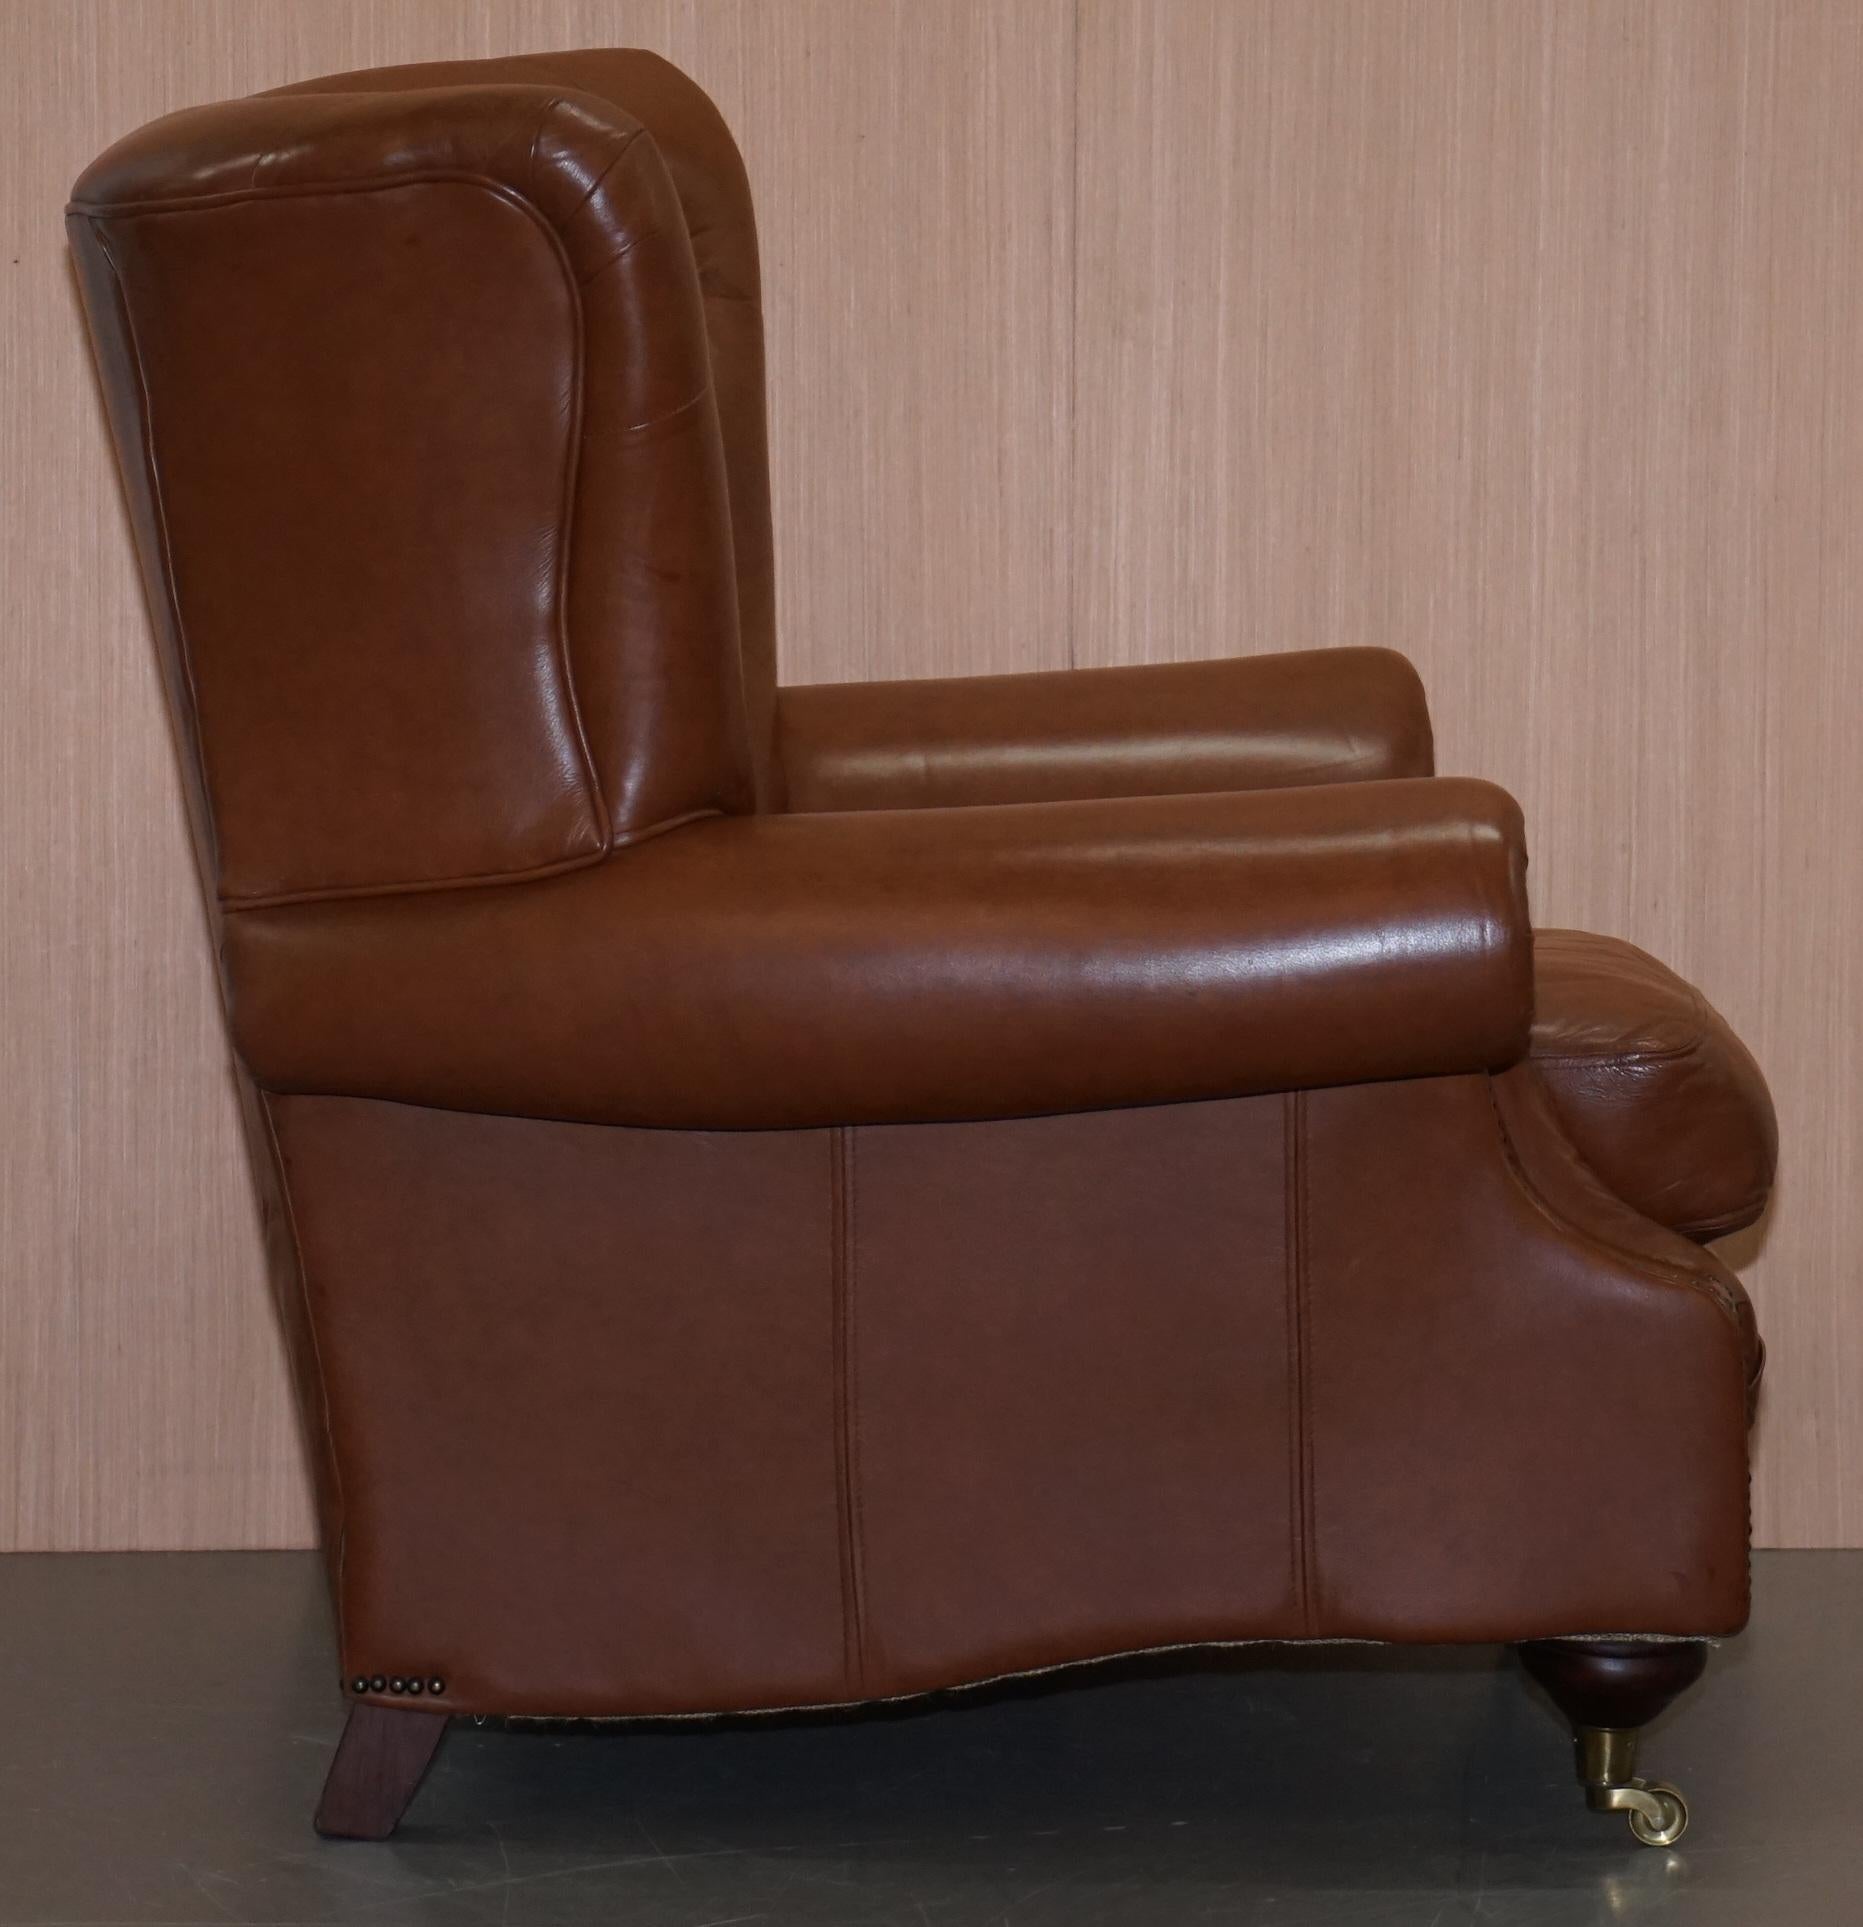 Medallion Upholstery Brown Leather Chesterfield Armchair Part of Suite 3